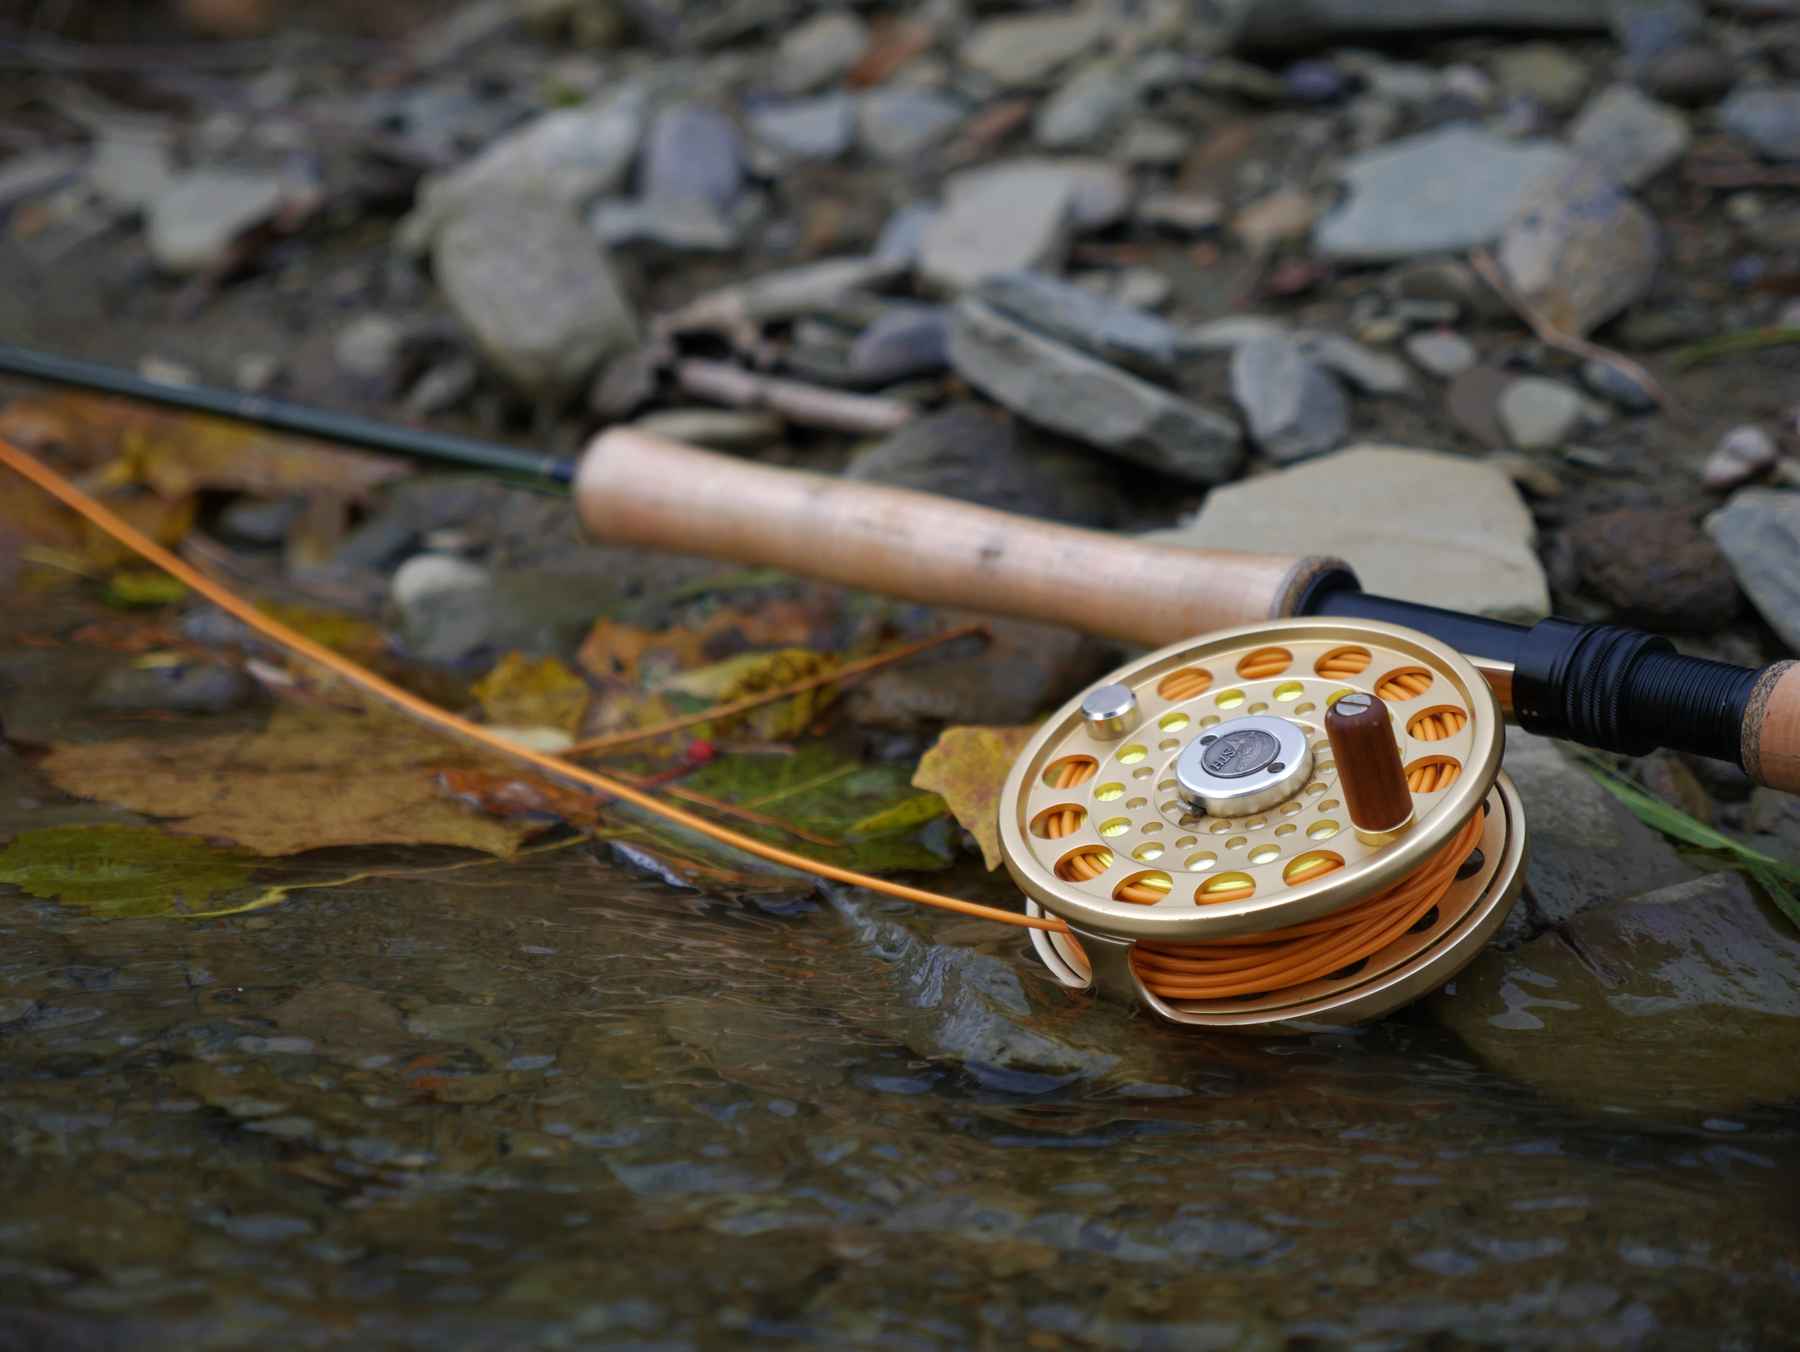 Review: ECHO OHS (One Hand Spey) fly rod